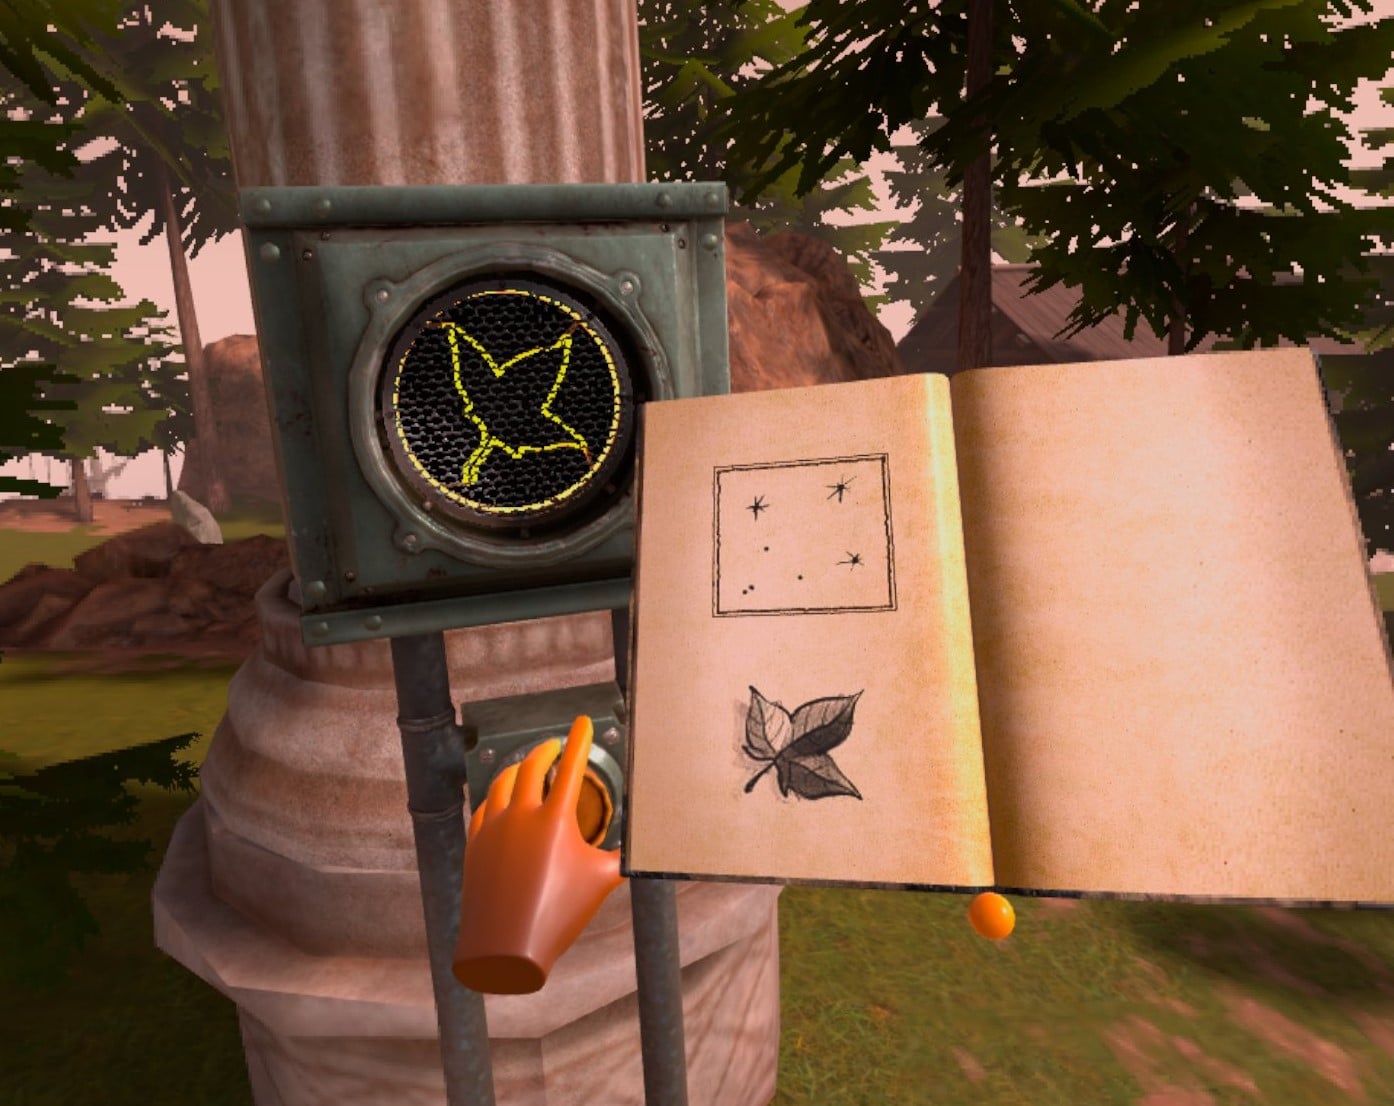 myst holding a book and turning a dial